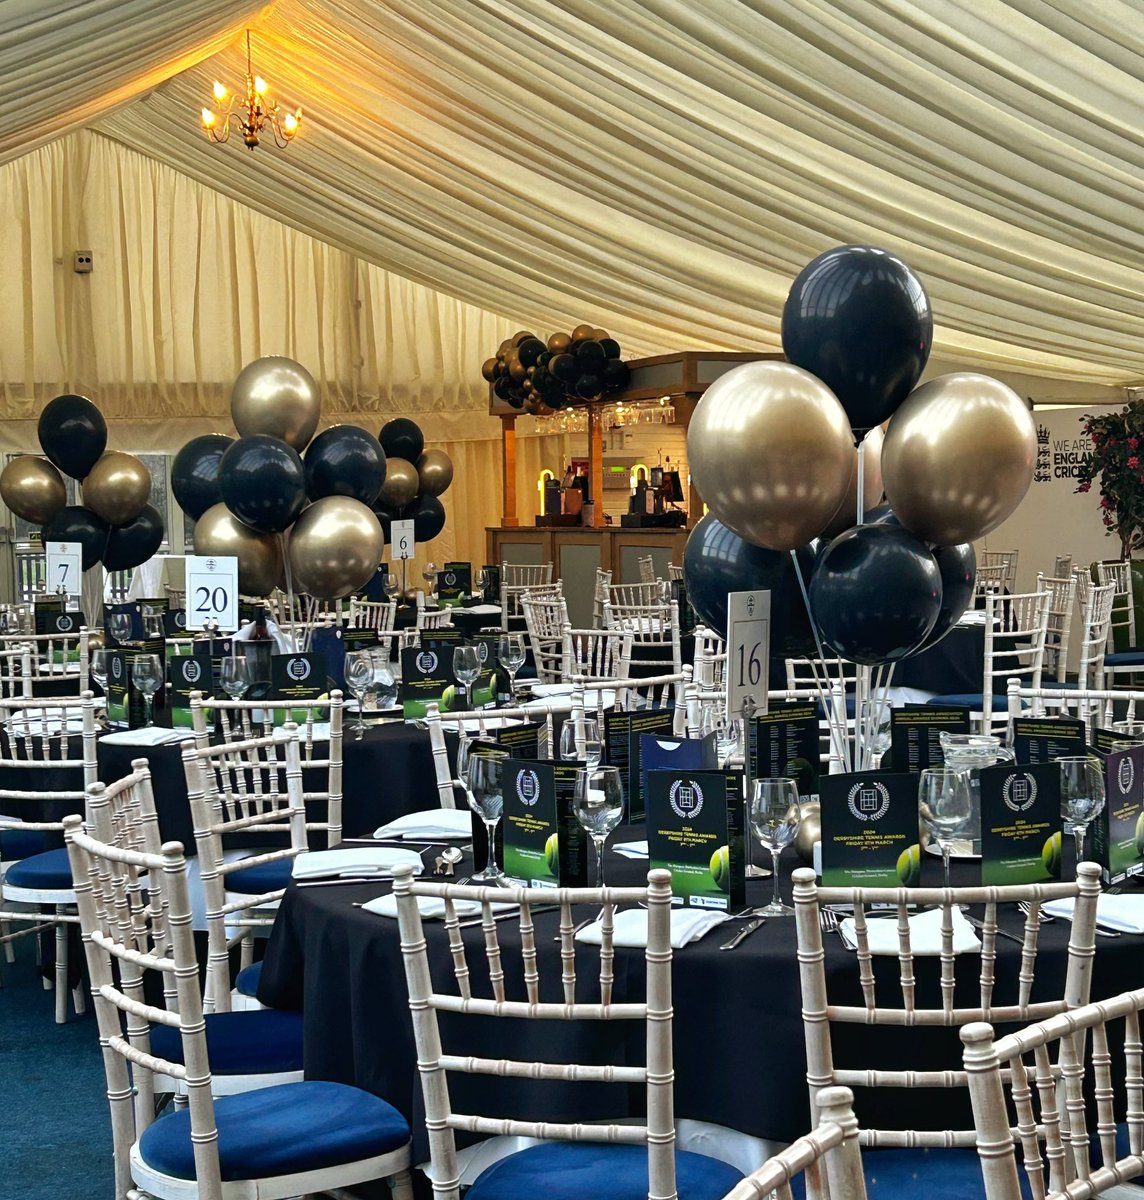 We look forward to welcoming our guests to the sold out Derbyshire Tennis Awards! See you at 7…